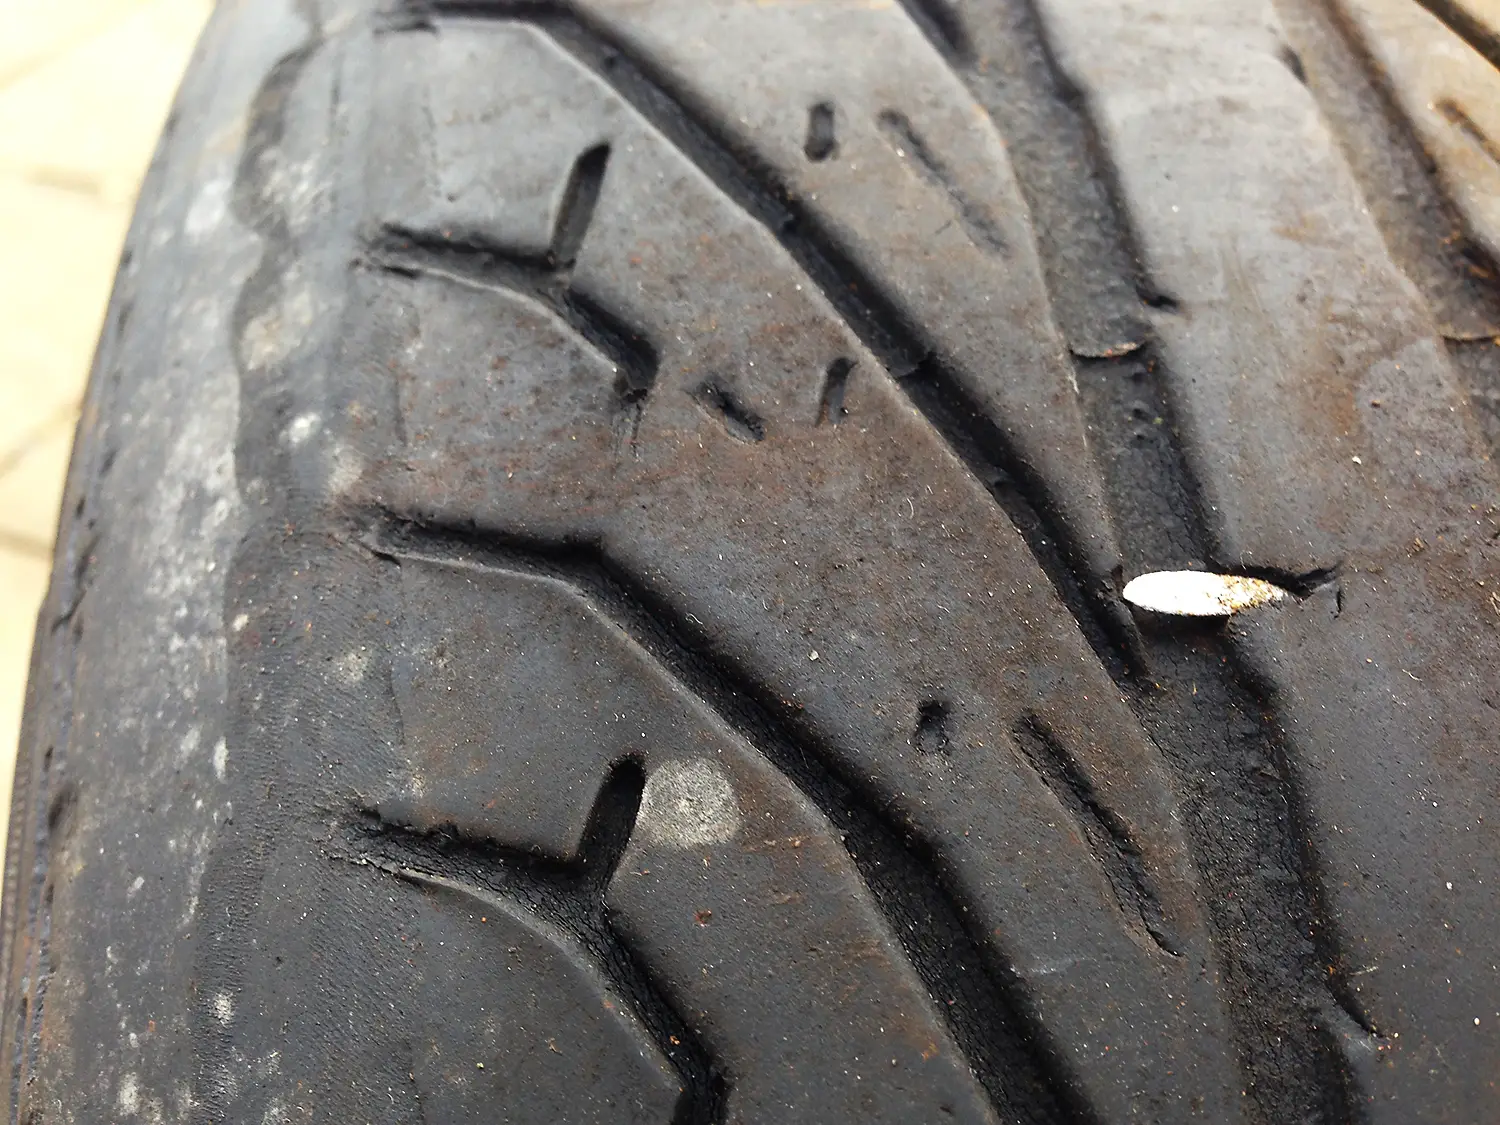 nail in tyre - The DIY Life